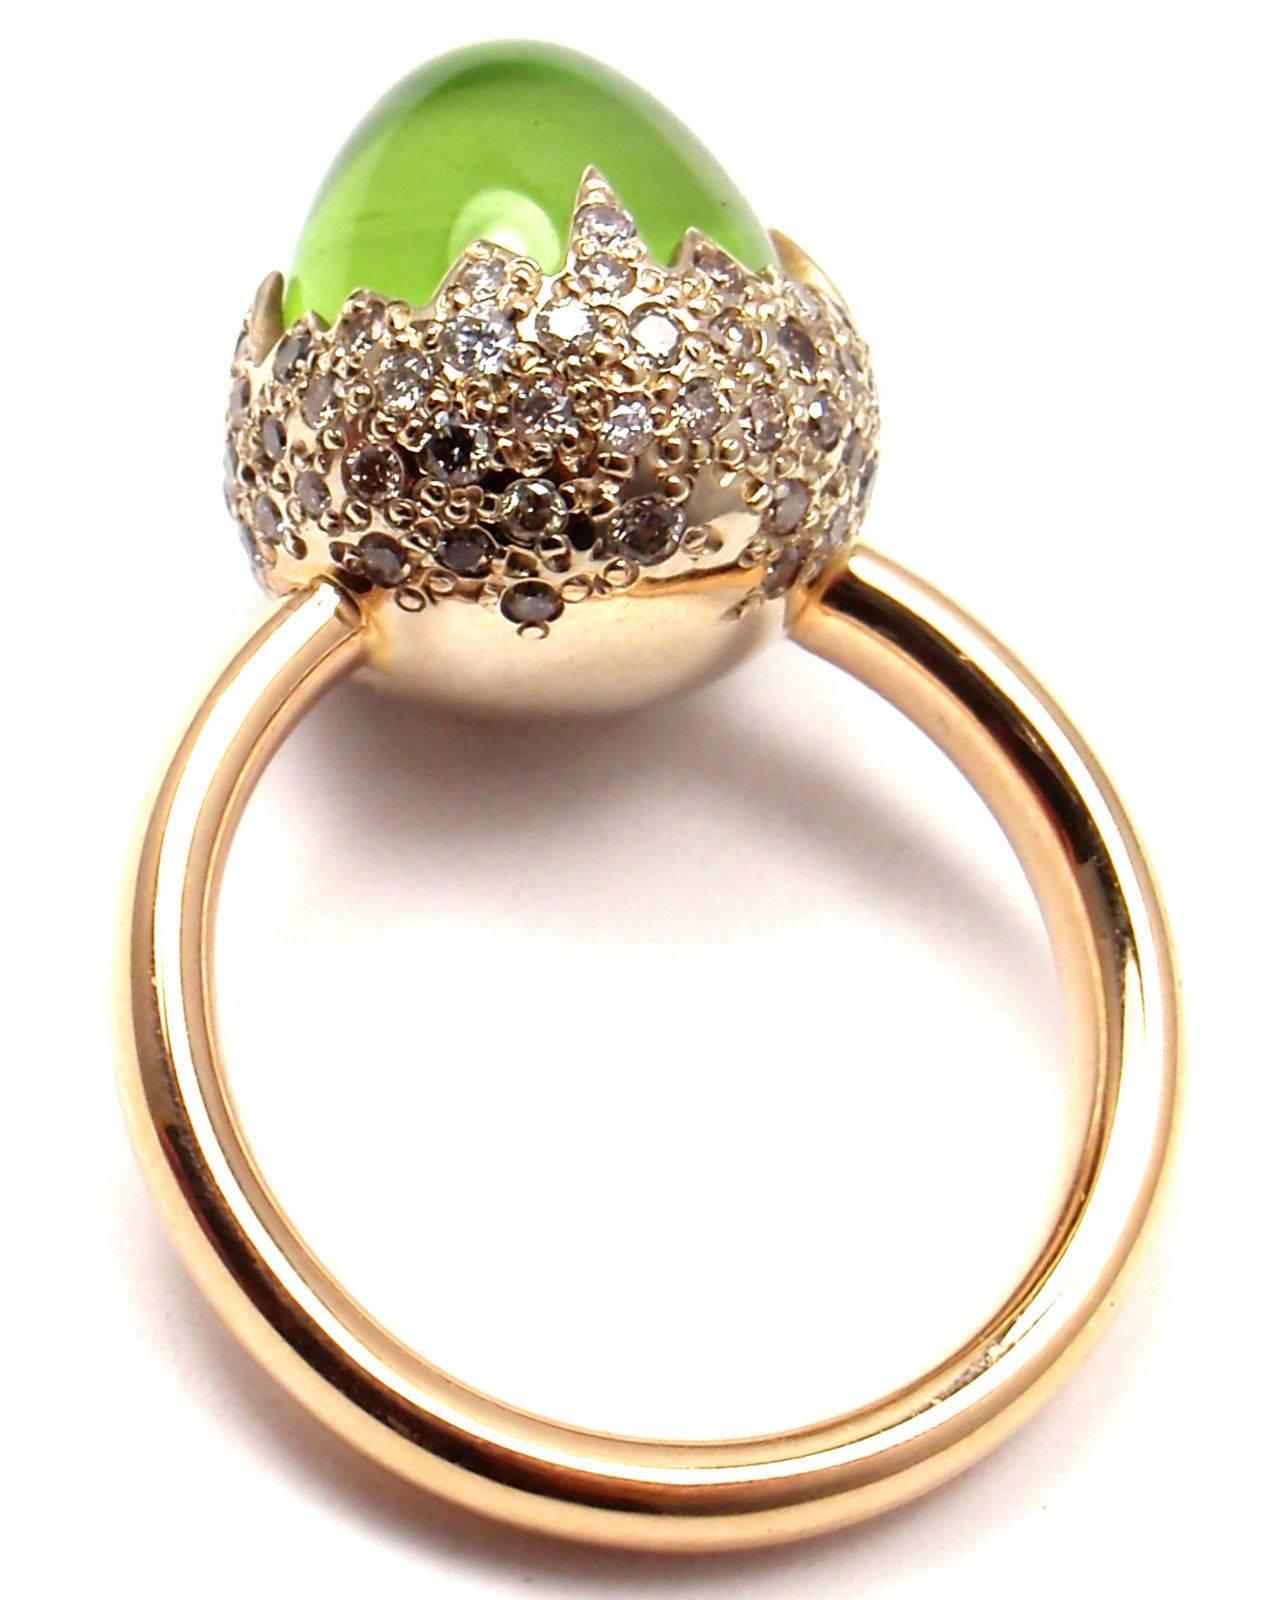 18k Rose & White Gold Peridot Diamond Chimera Ring by Pomellato.
With 1 Peridot 11mm x 13mm
Round Brilliant Cut Diamonds total weight approx. .25ct

This ring comes with original Pomellato box and a certificate.

Details:
Ring Size: